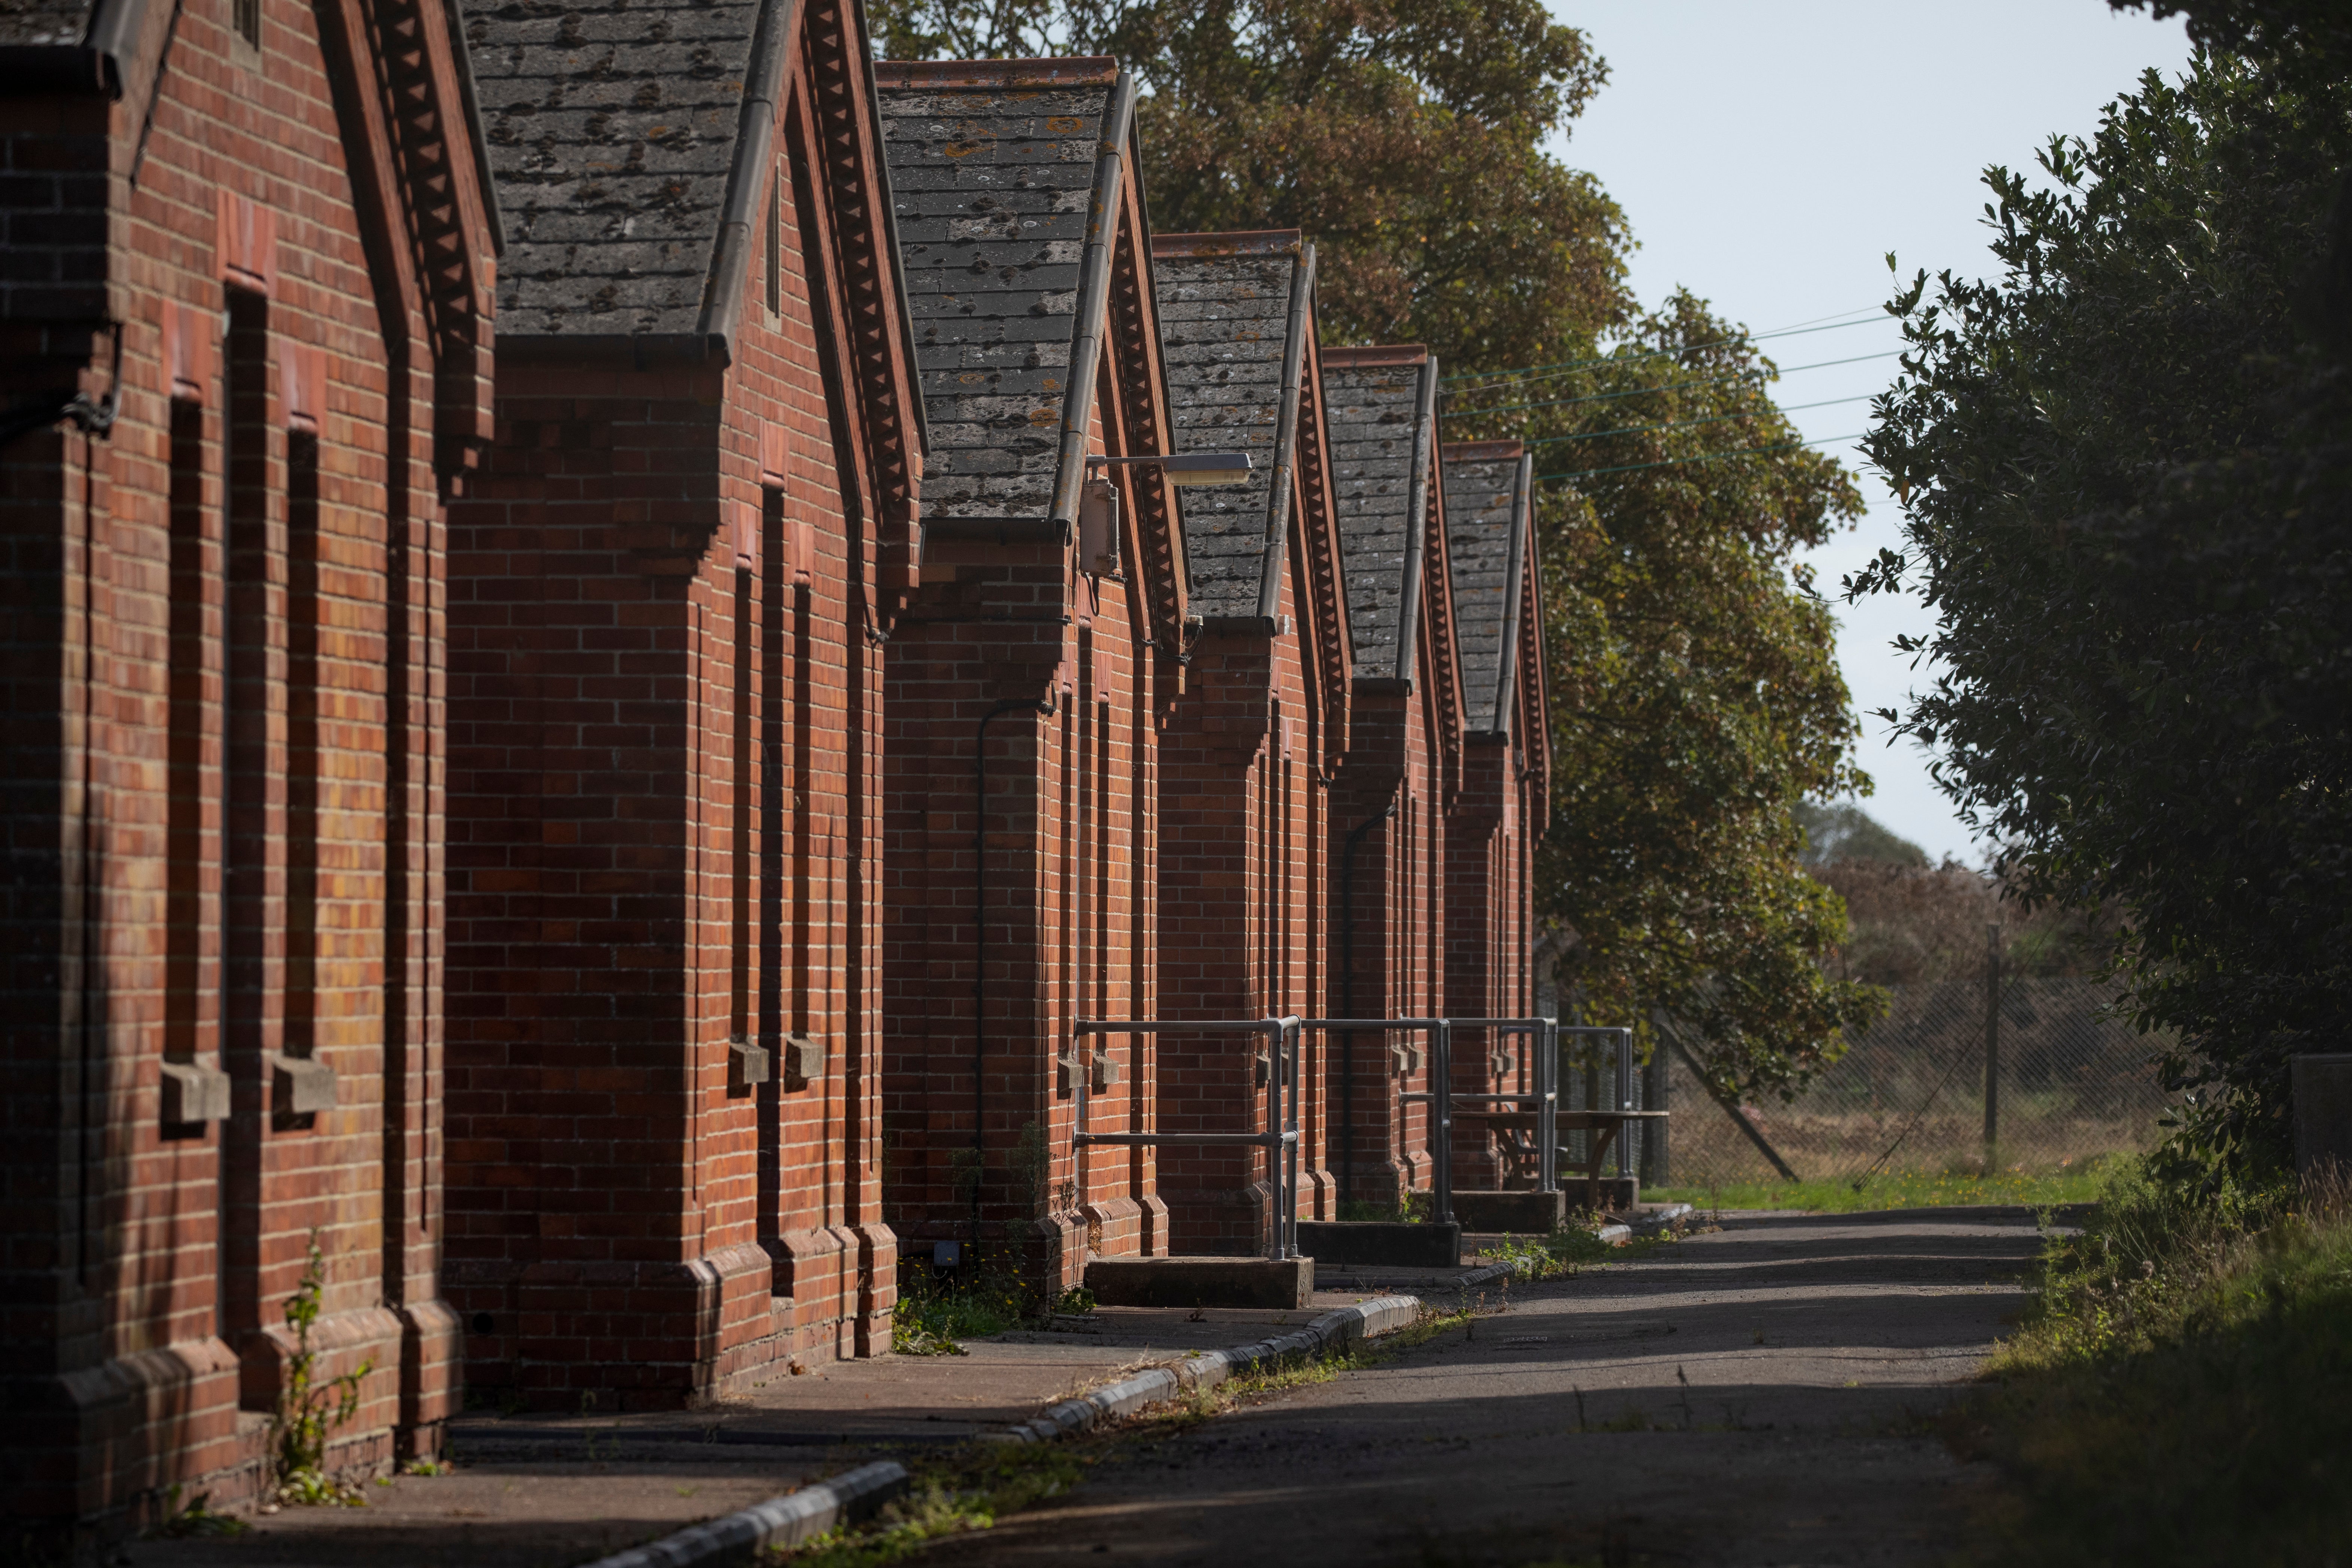 Napier barracks is currently housing some of those seeking asylum in the UK